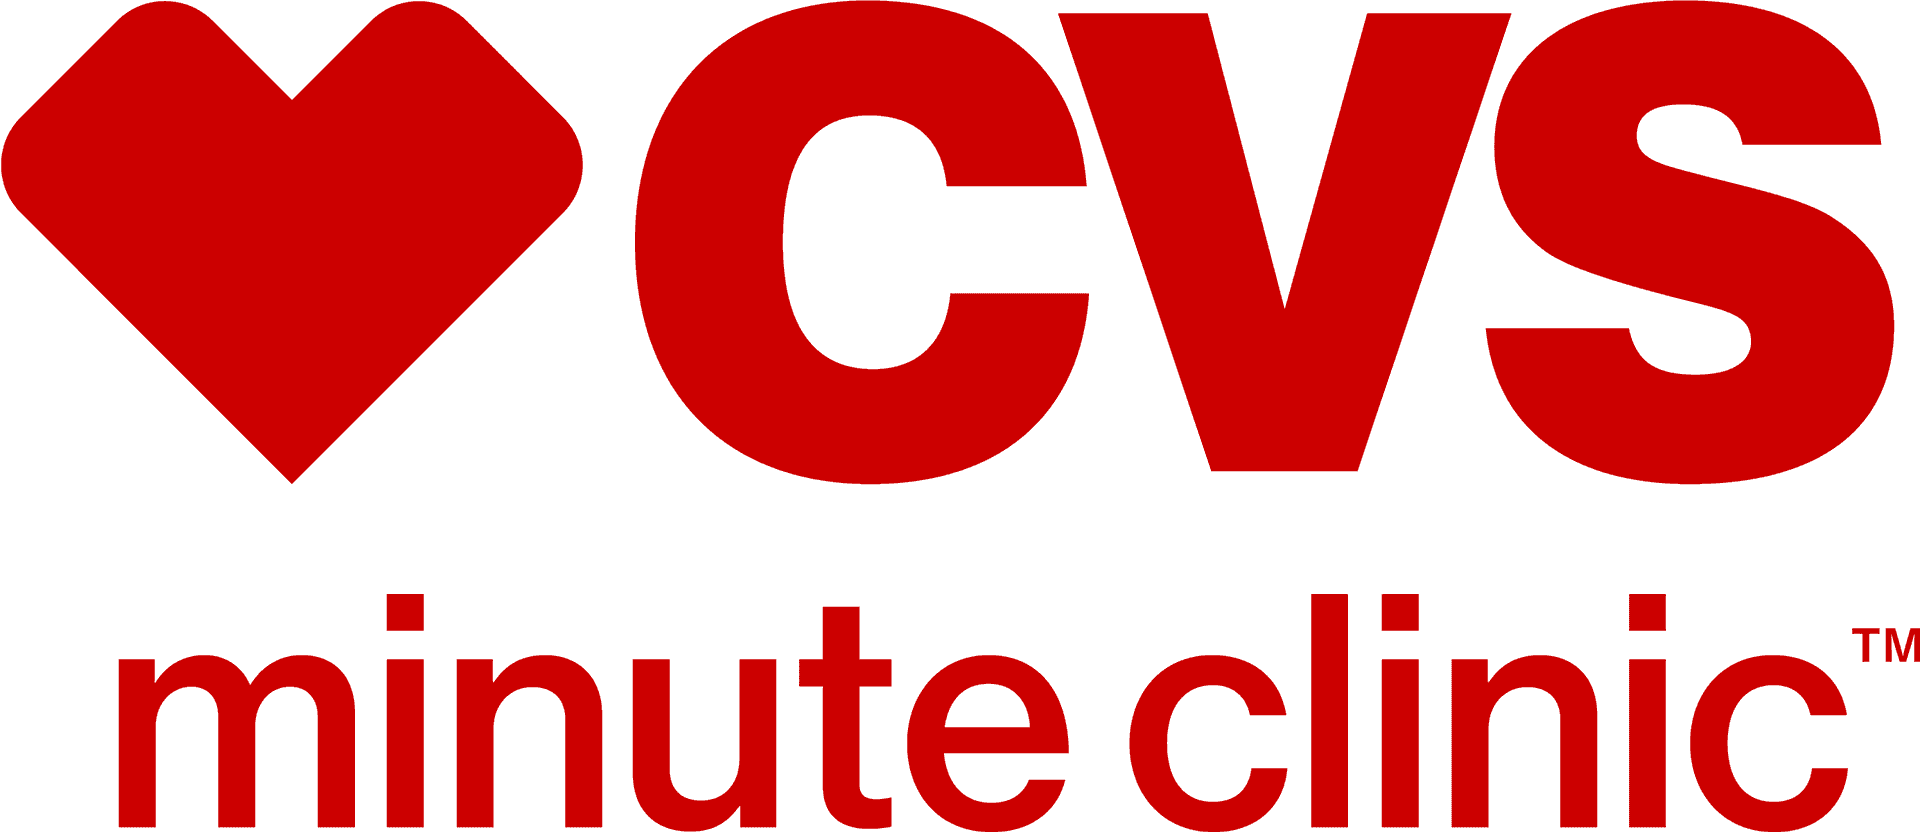 C V S Minute Clinic Logo PNG image